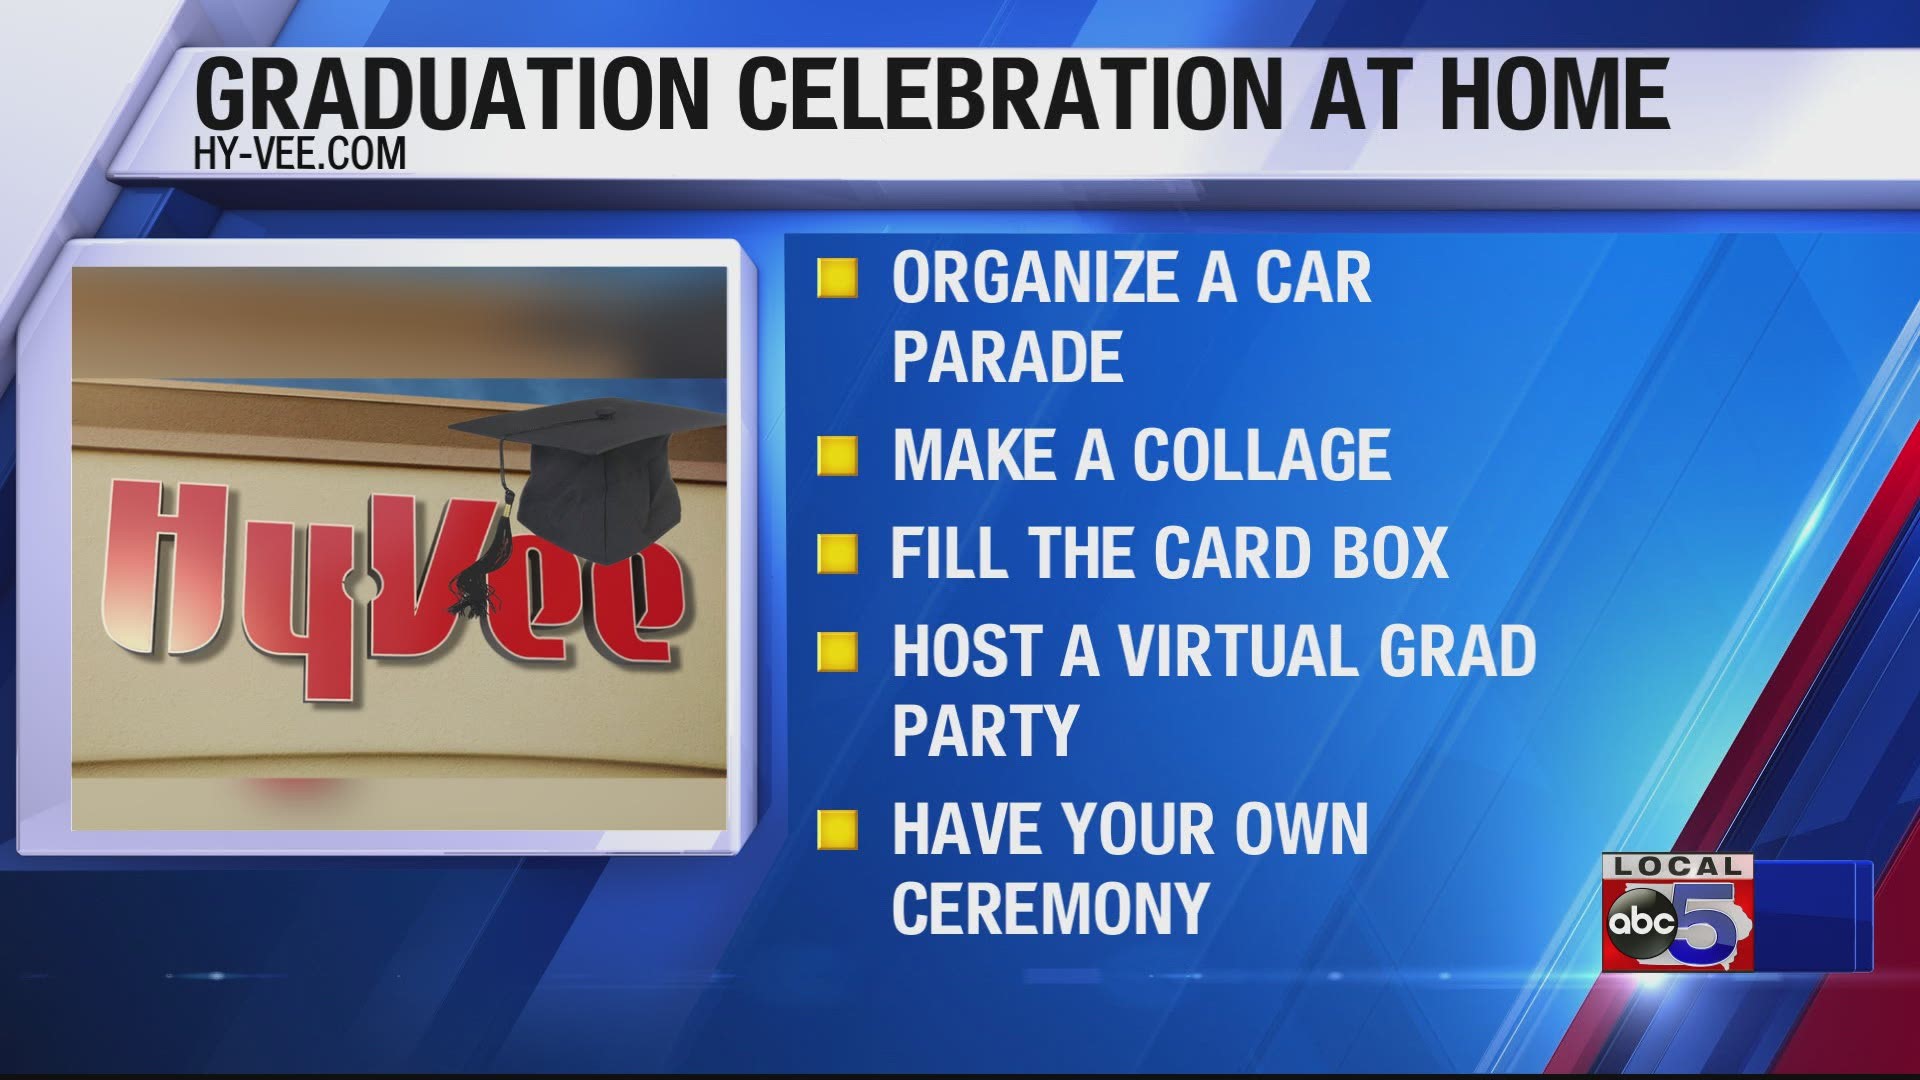 With families across the country looking for new or different ways to celebrate graduation season this year, Hy-Vee shared their DIY graduation party checklist.